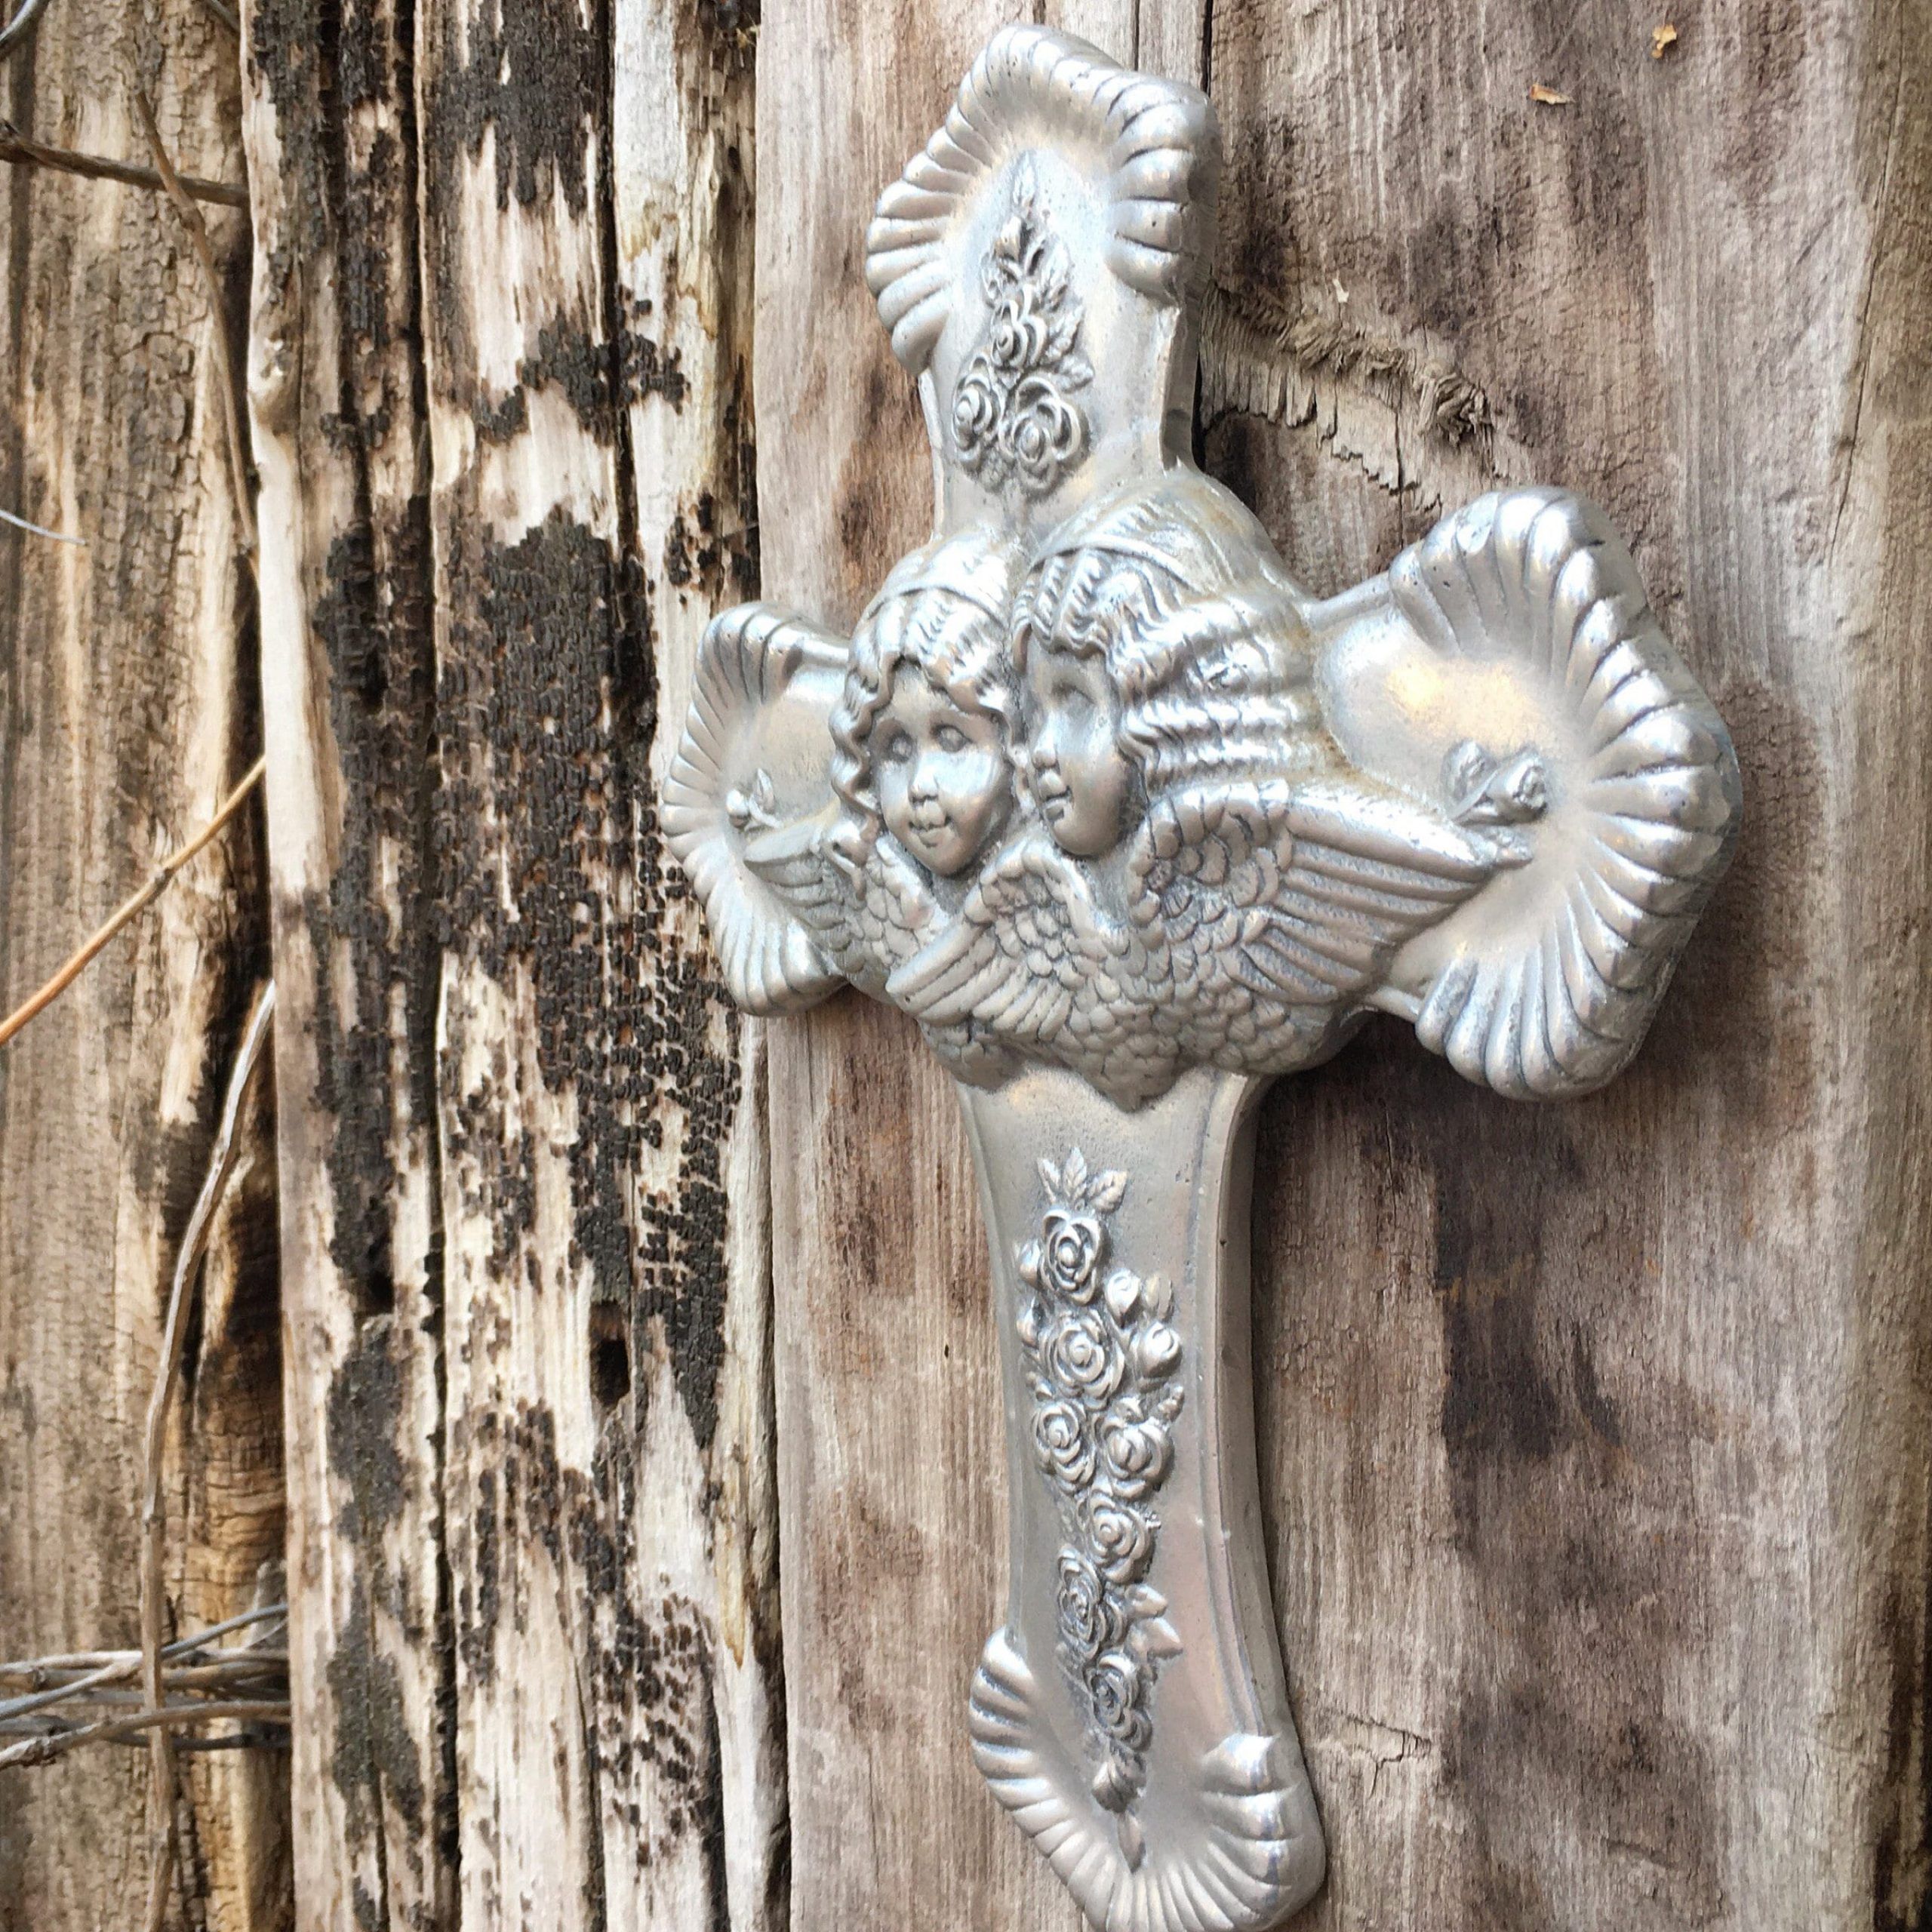 Pewter Metal Wall Cross With Winged Angels, Mexican Rustic Home Decor Inside 2018 Pewter Metal Wall Art (View 17 of 20)